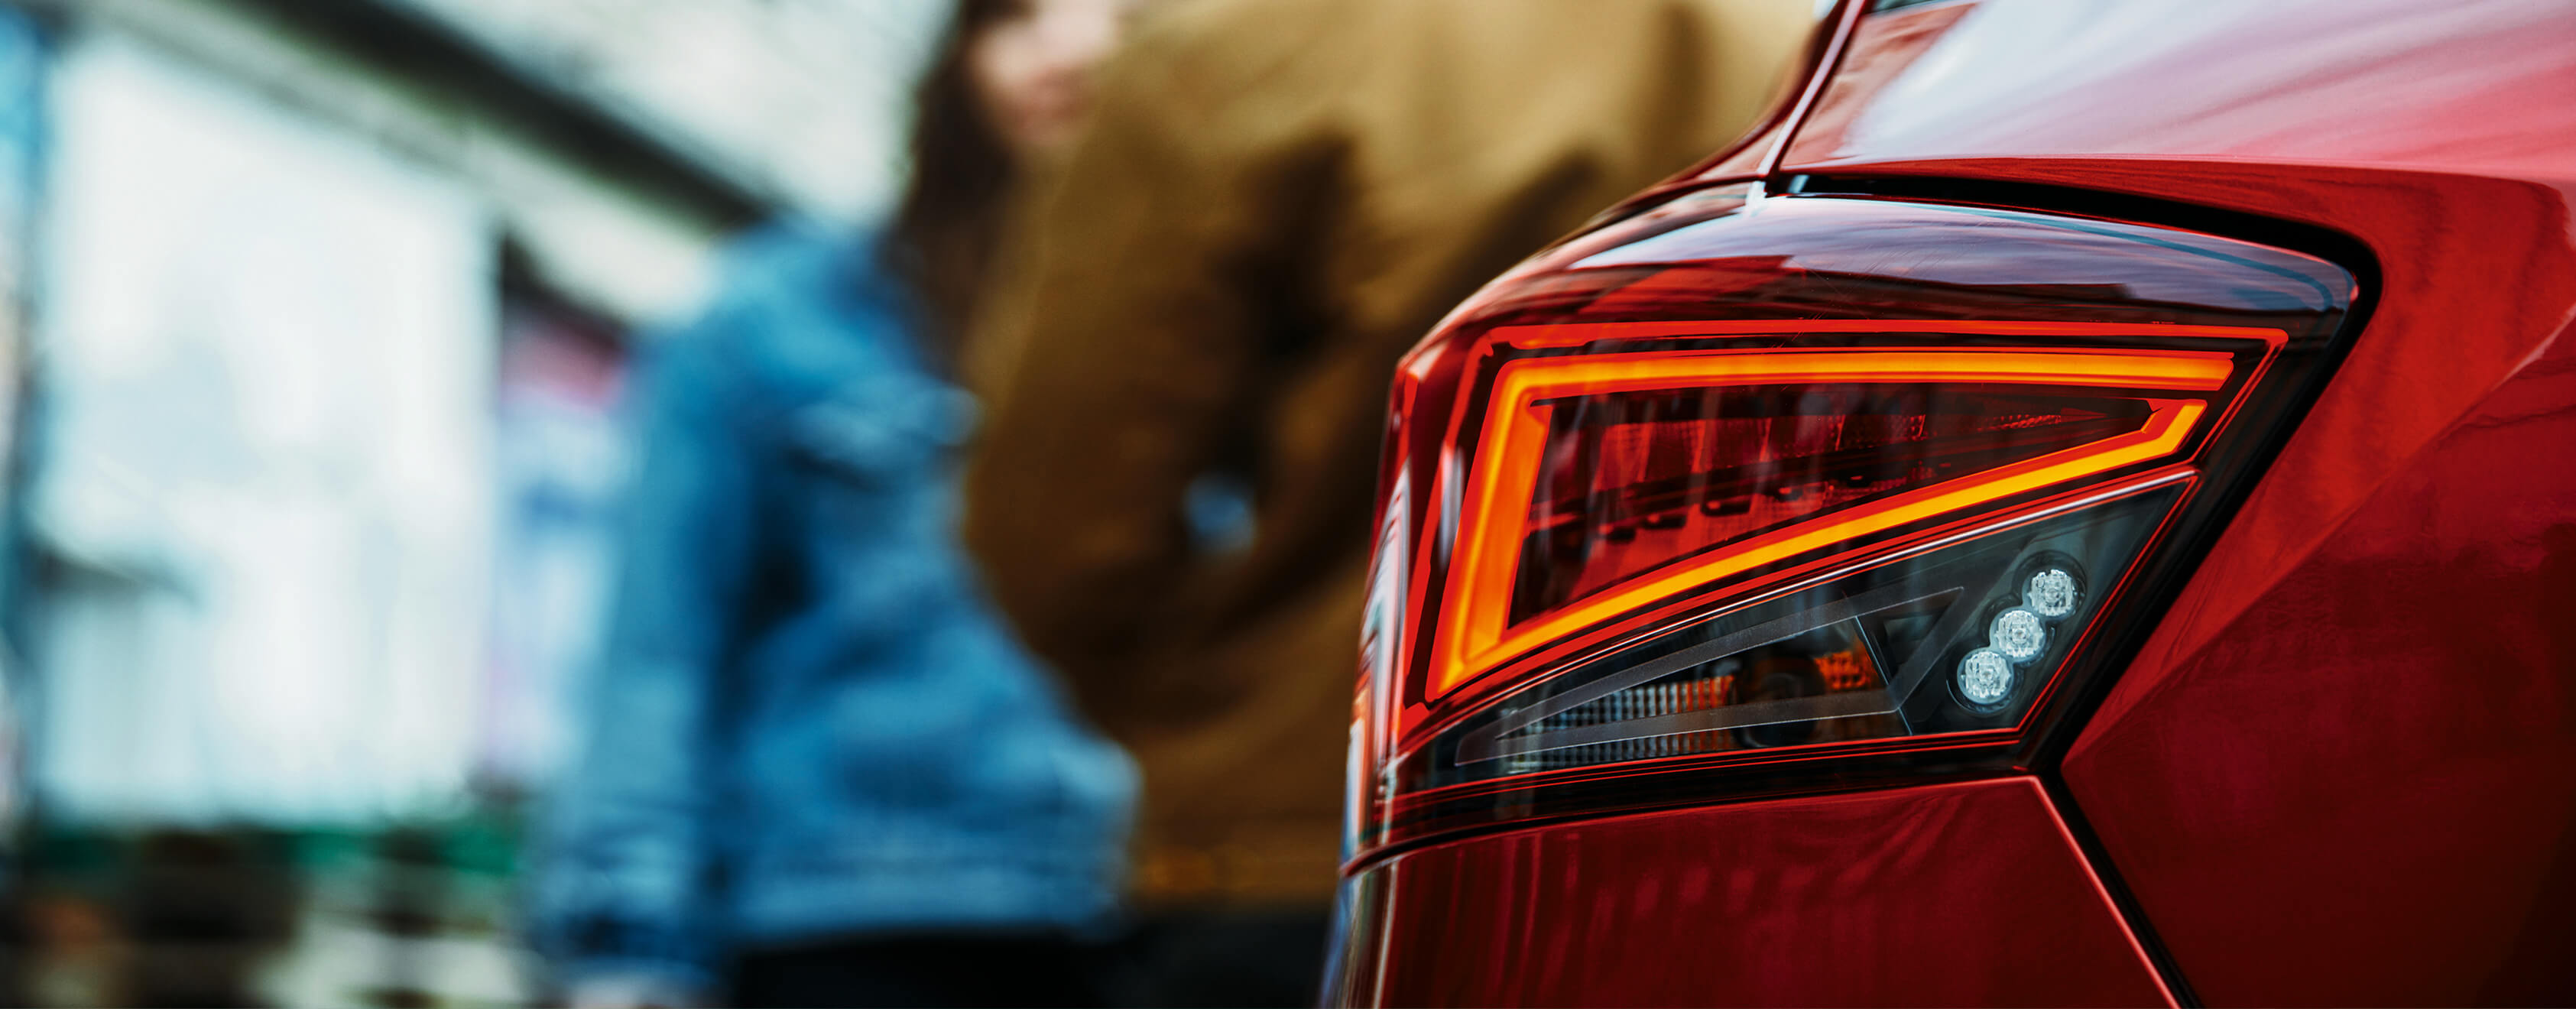 SEAT new car services warranty extension  maintenance – rear view of rear light with people in the background out of focus